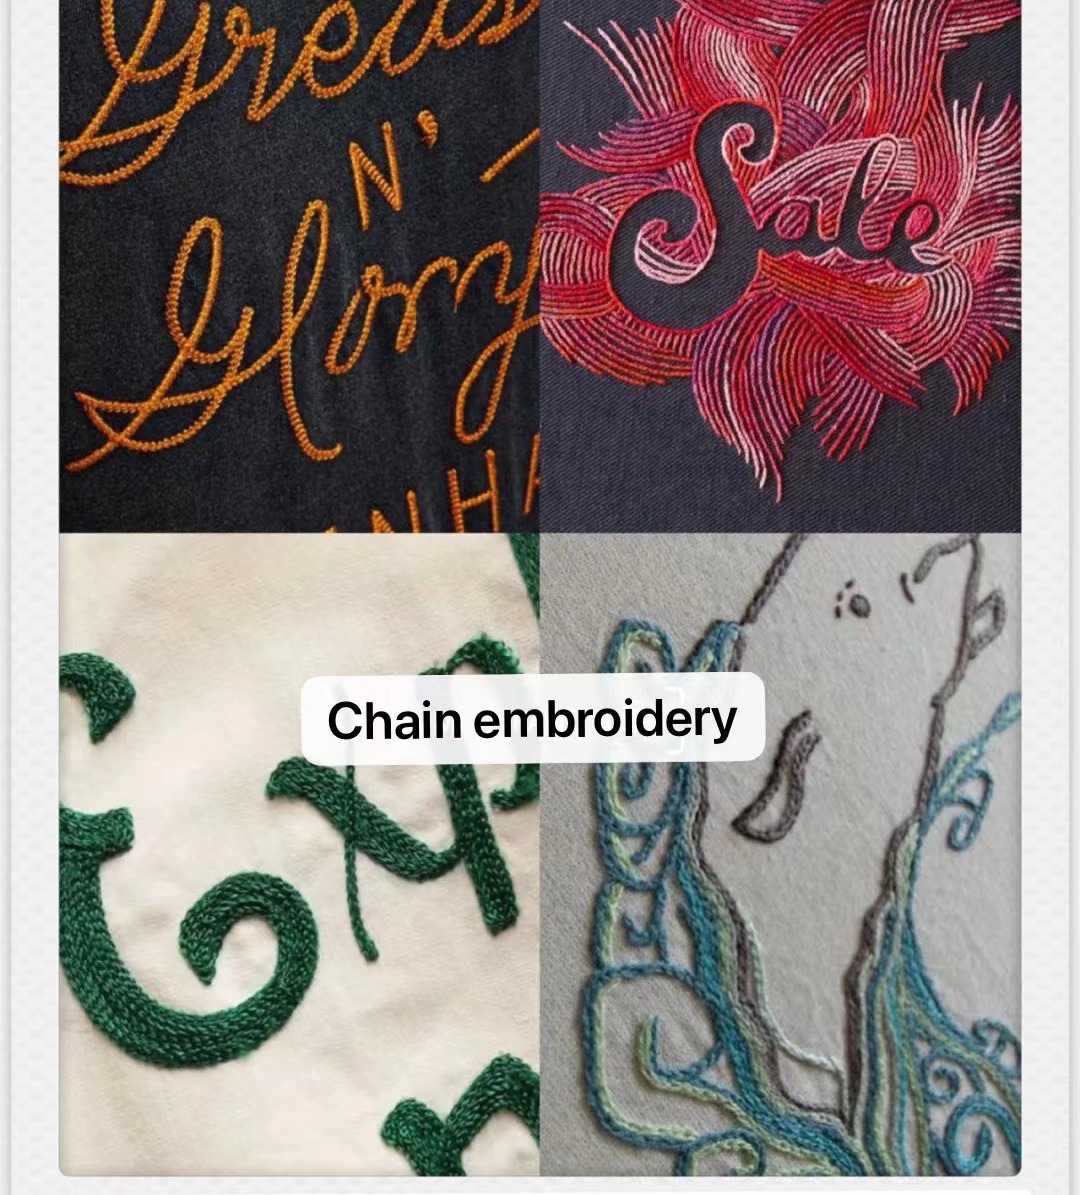 Chain embroidery